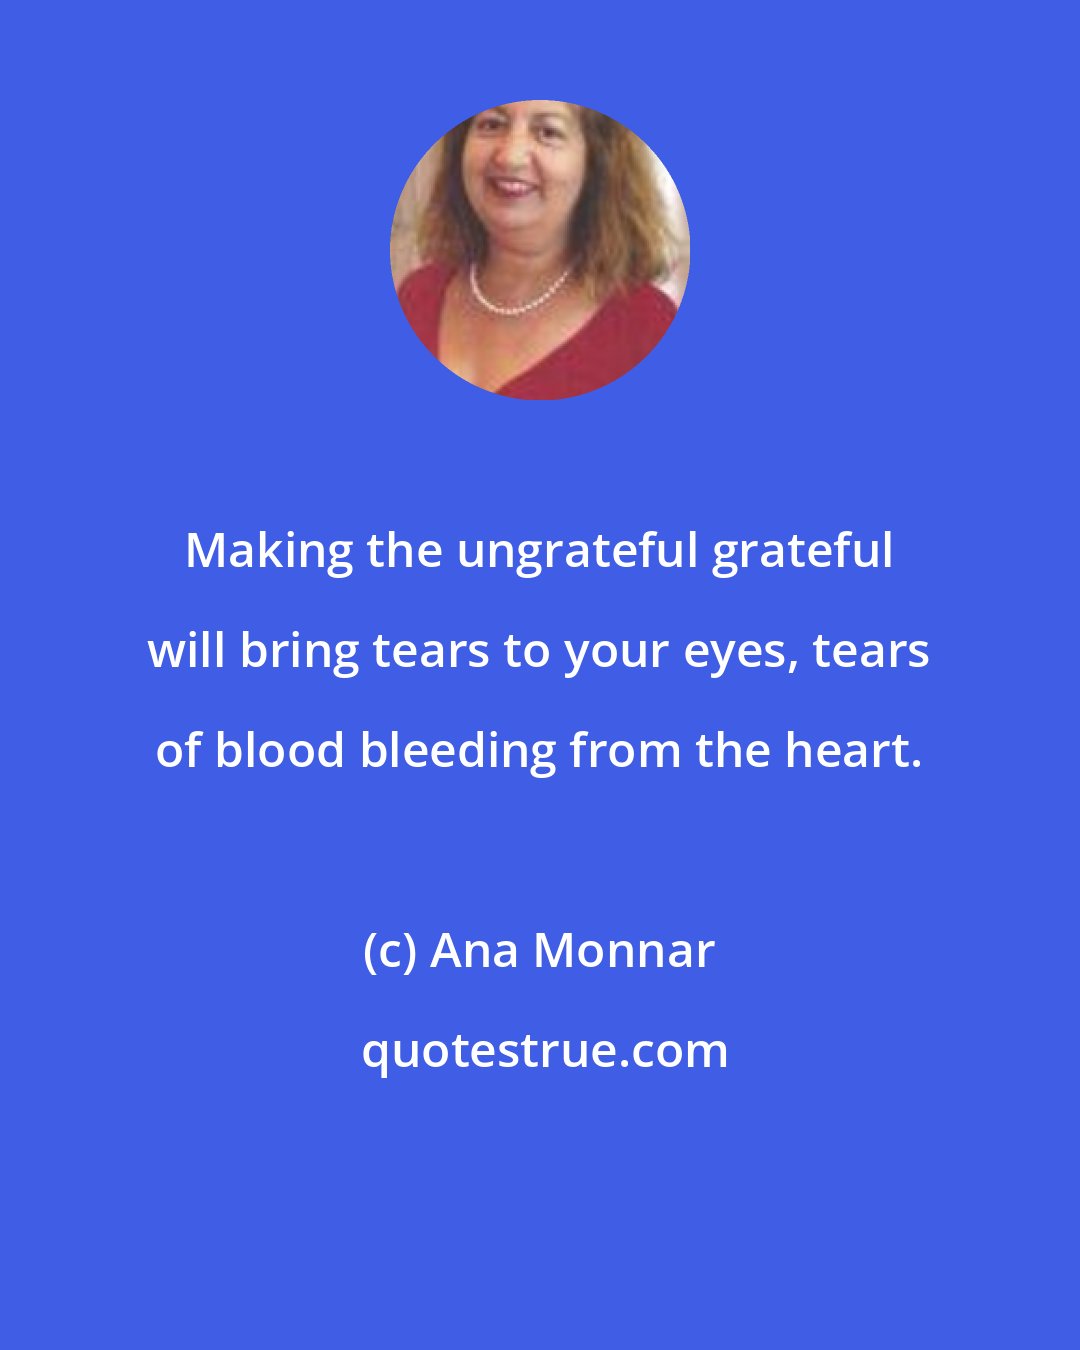 Ana Monnar: Making the ungrateful grateful will bring tears to your eyes, tears of blood bleeding from the heart.